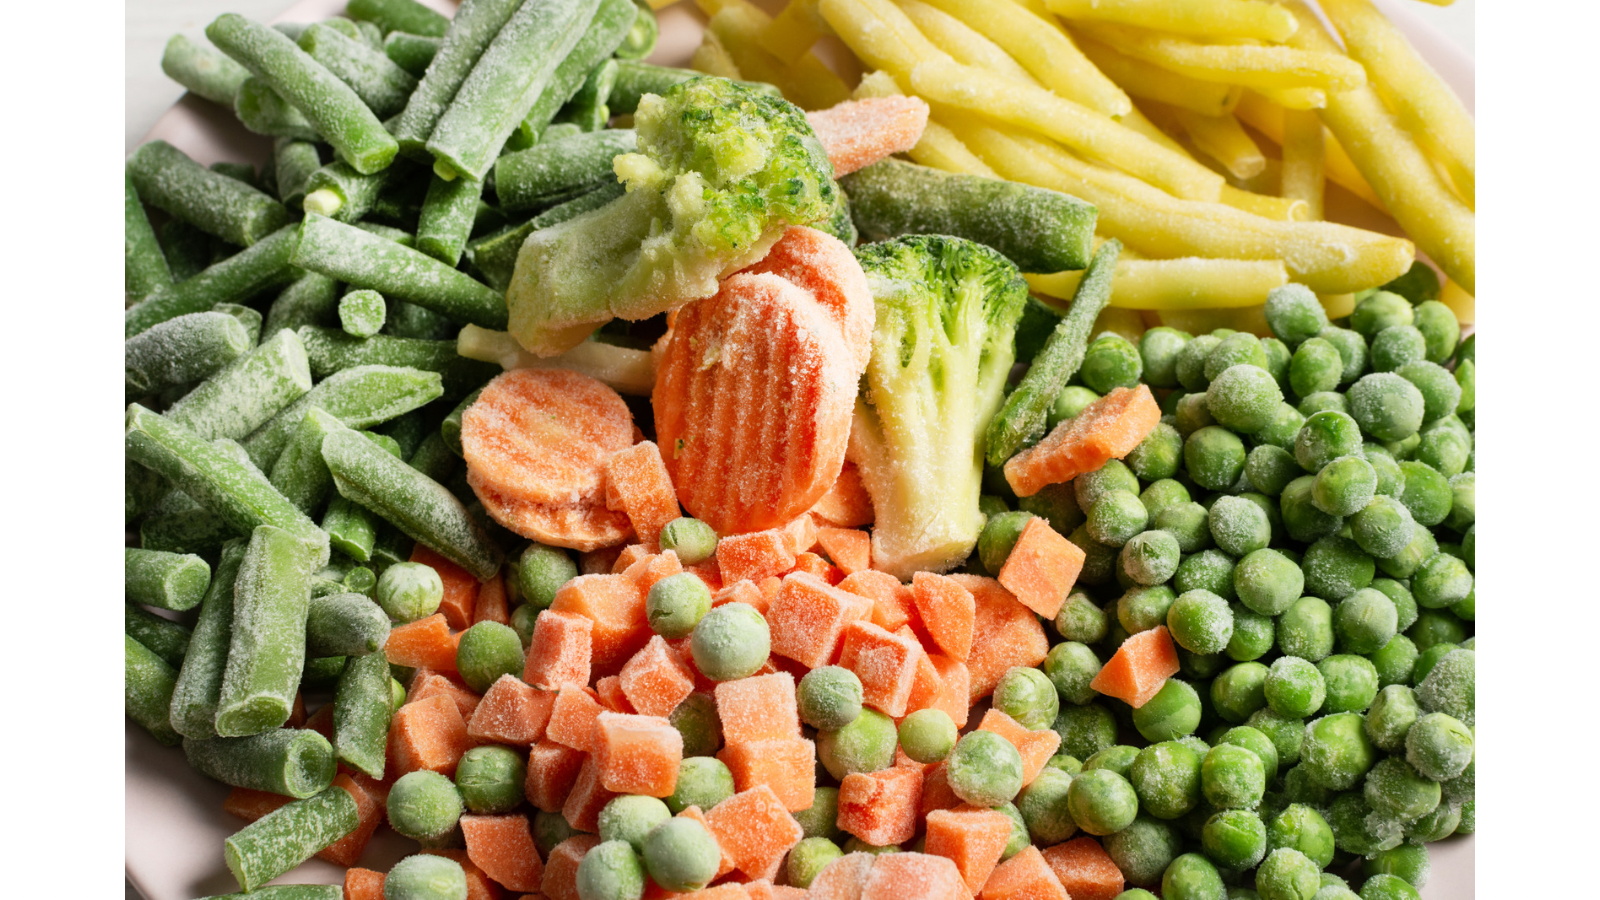 Why You Should Cook With Frozen Vegetables